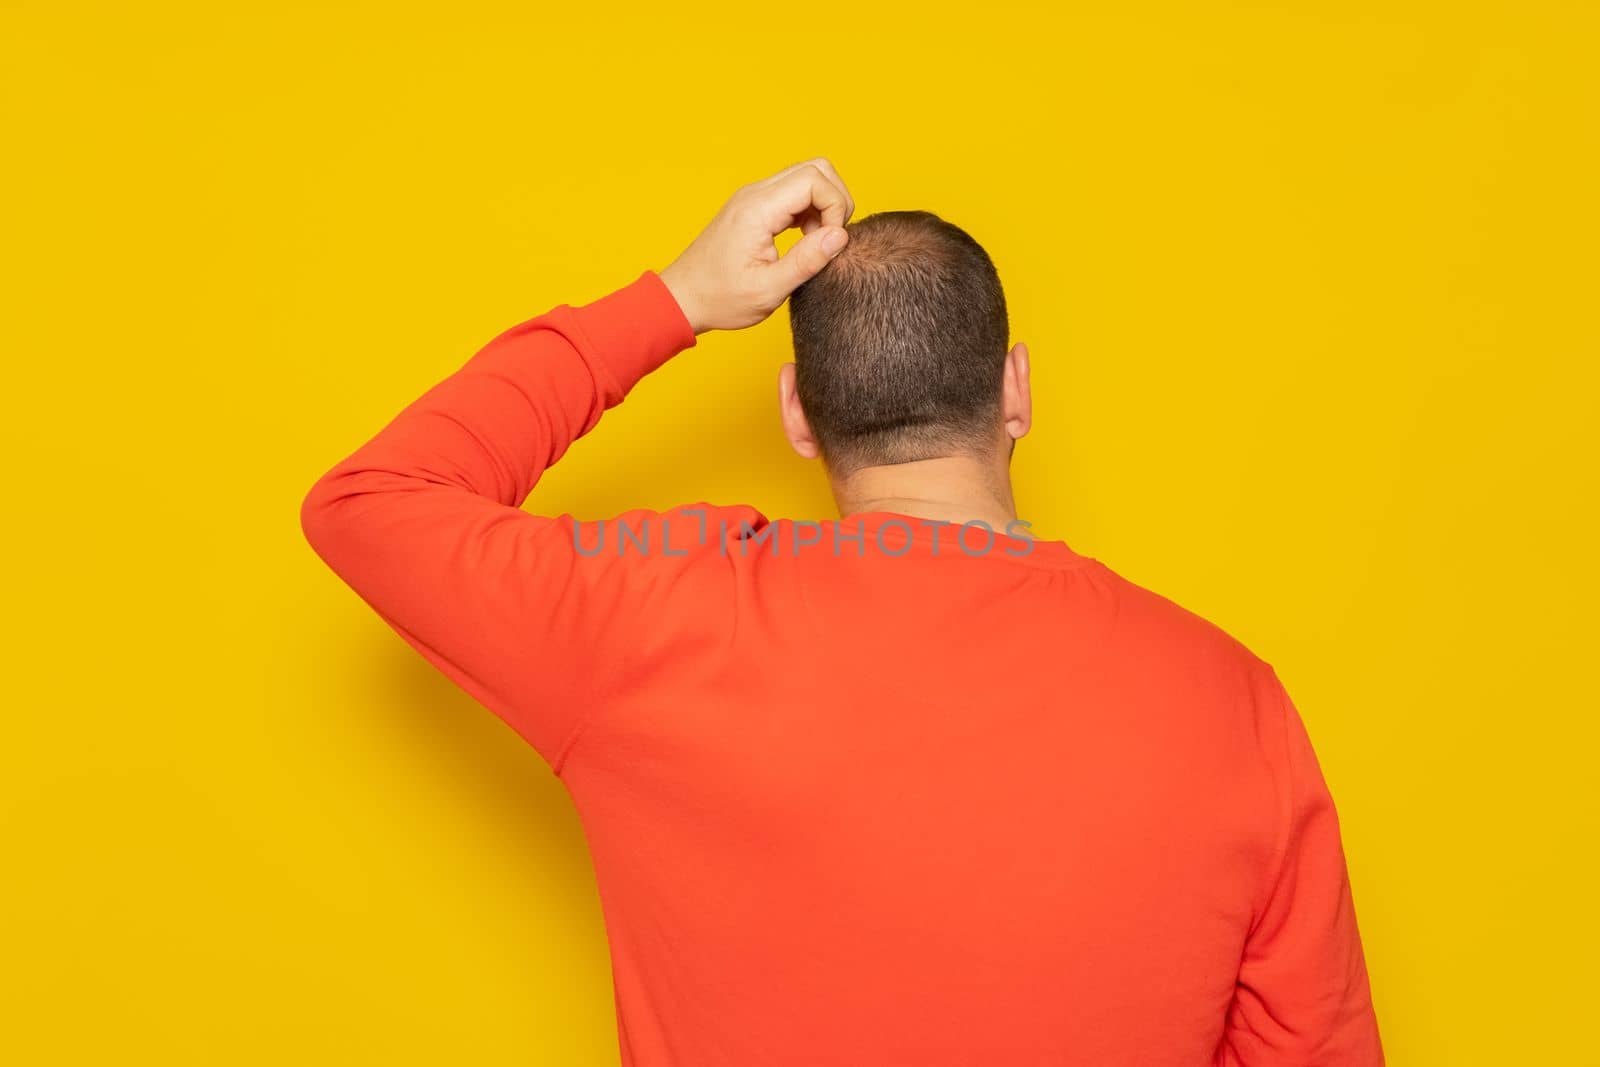 Back view of thoughtful man scratching his head over yellow background. He is doubting his existence, he does not understand the reason for life and what meaning it has